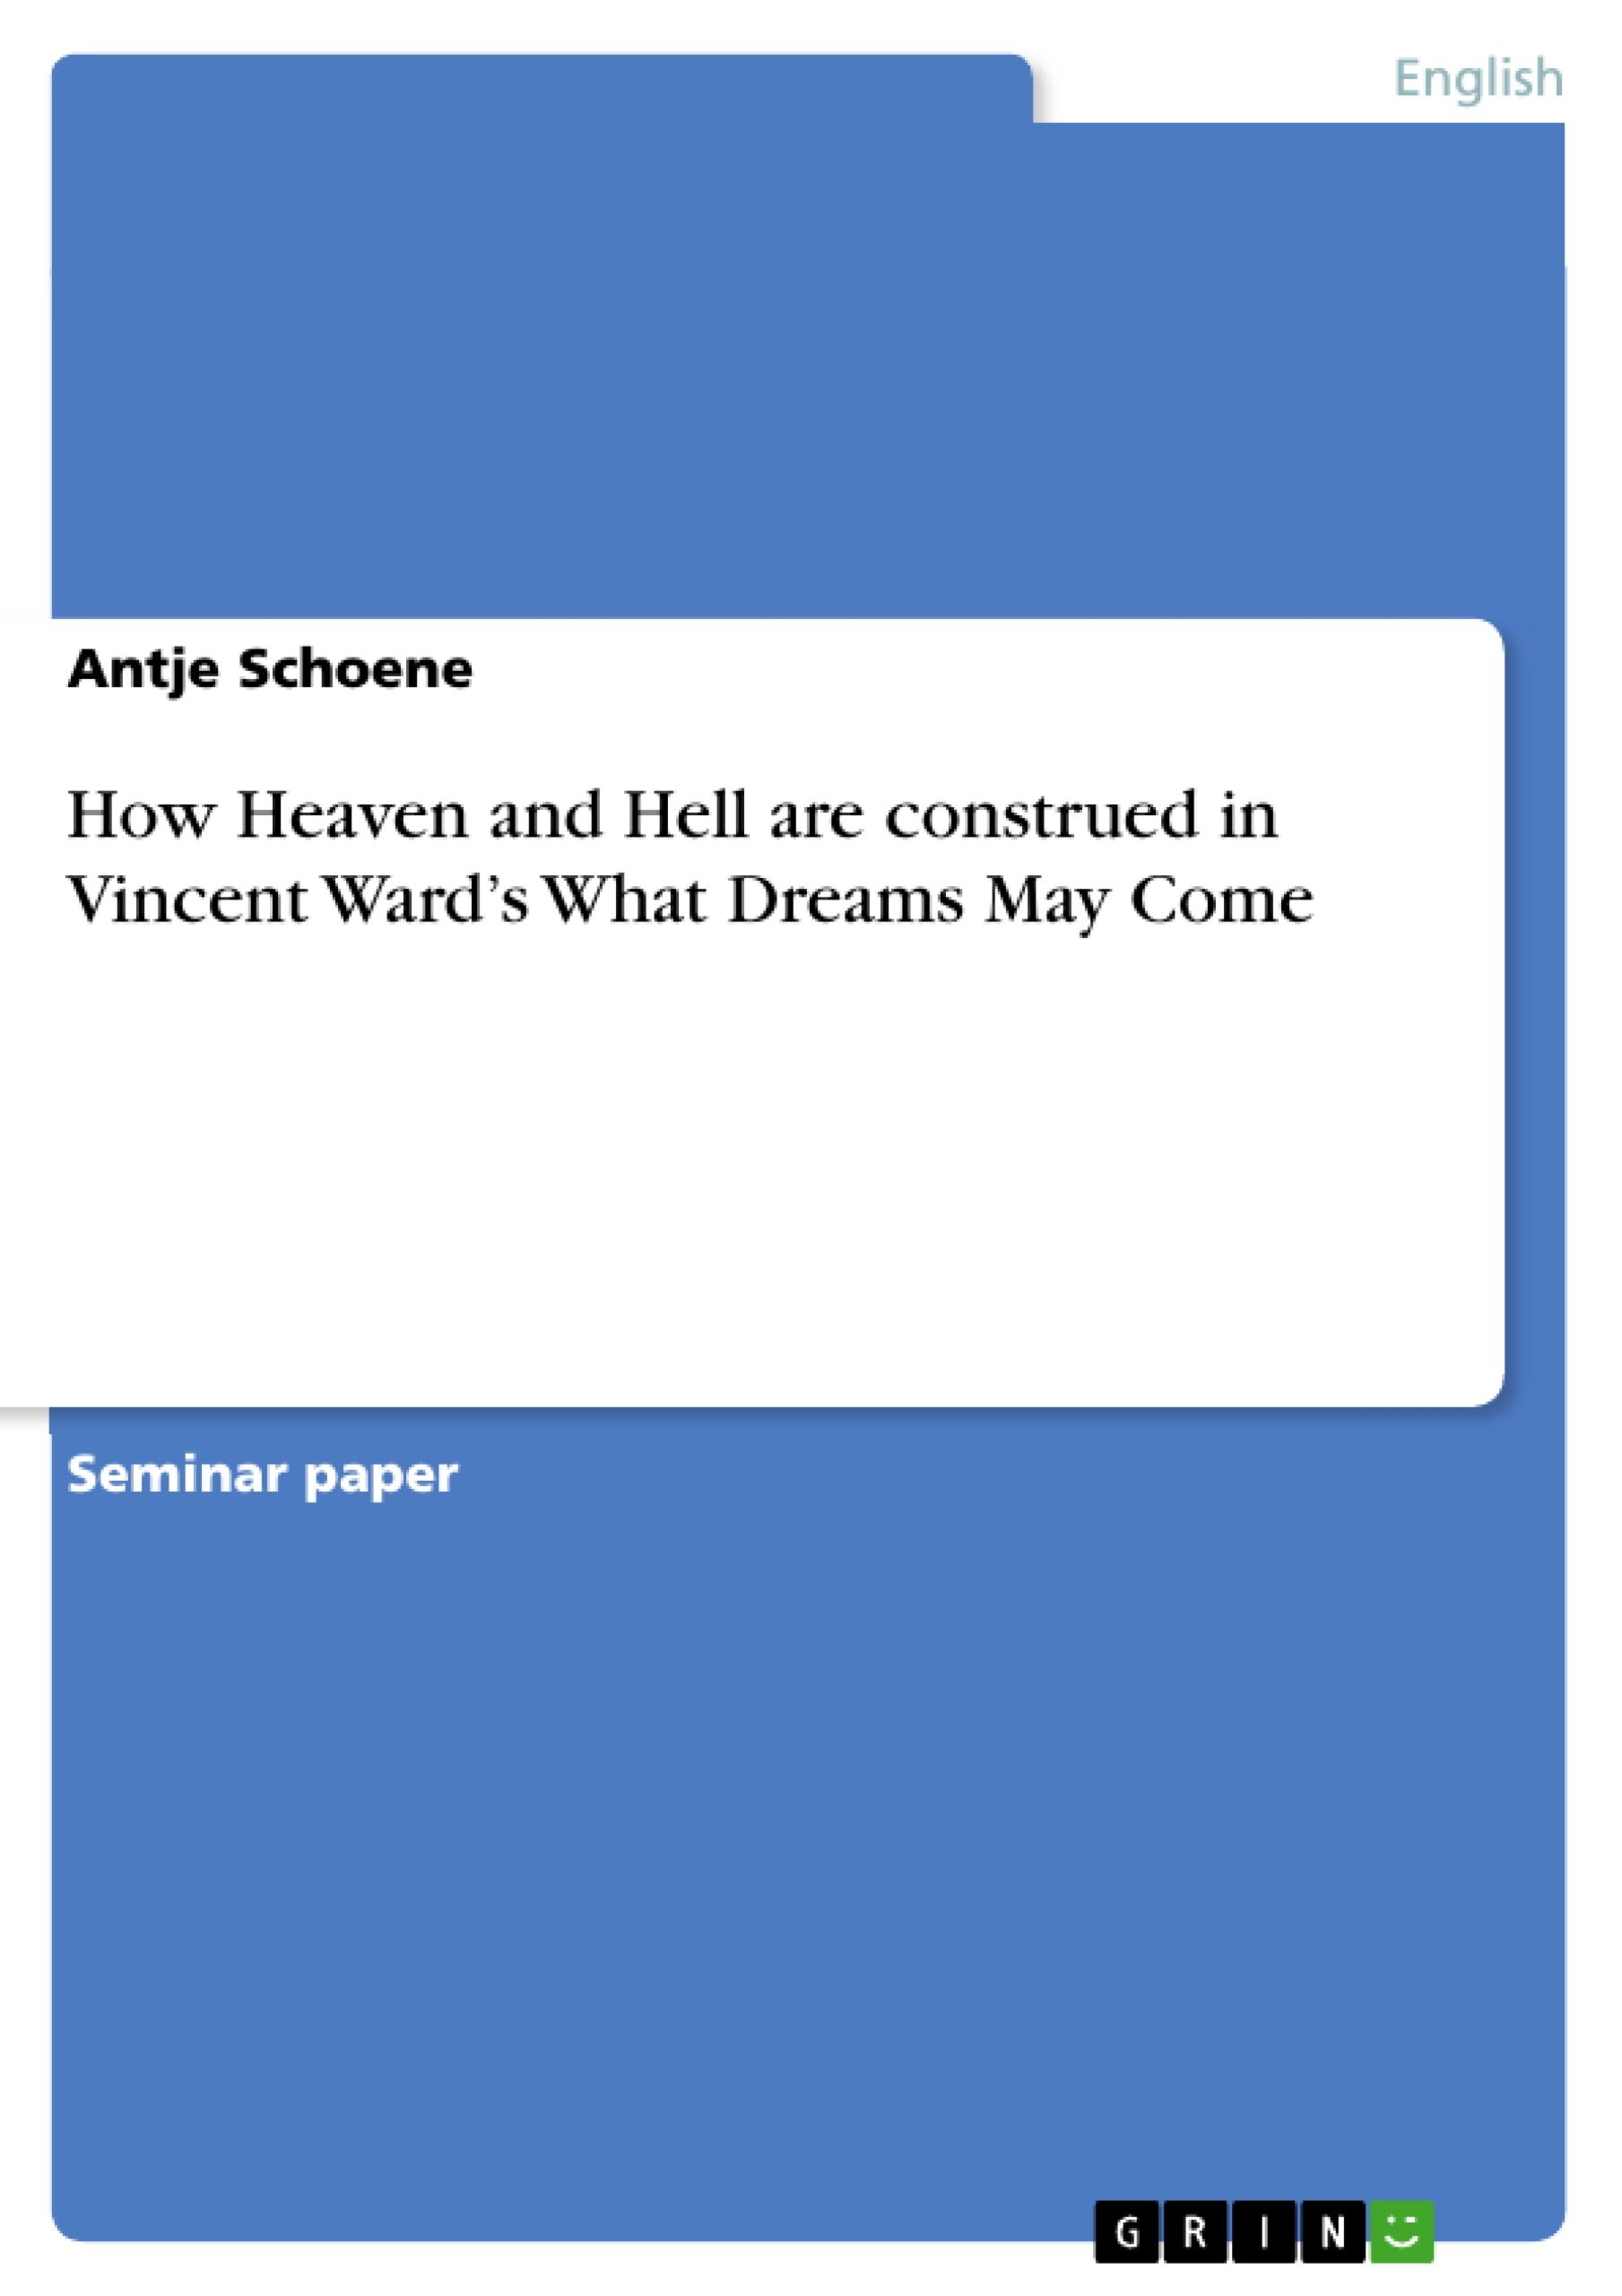 How Heaven and Hell are construed in Vincent Ward¿s What Dreams May Come